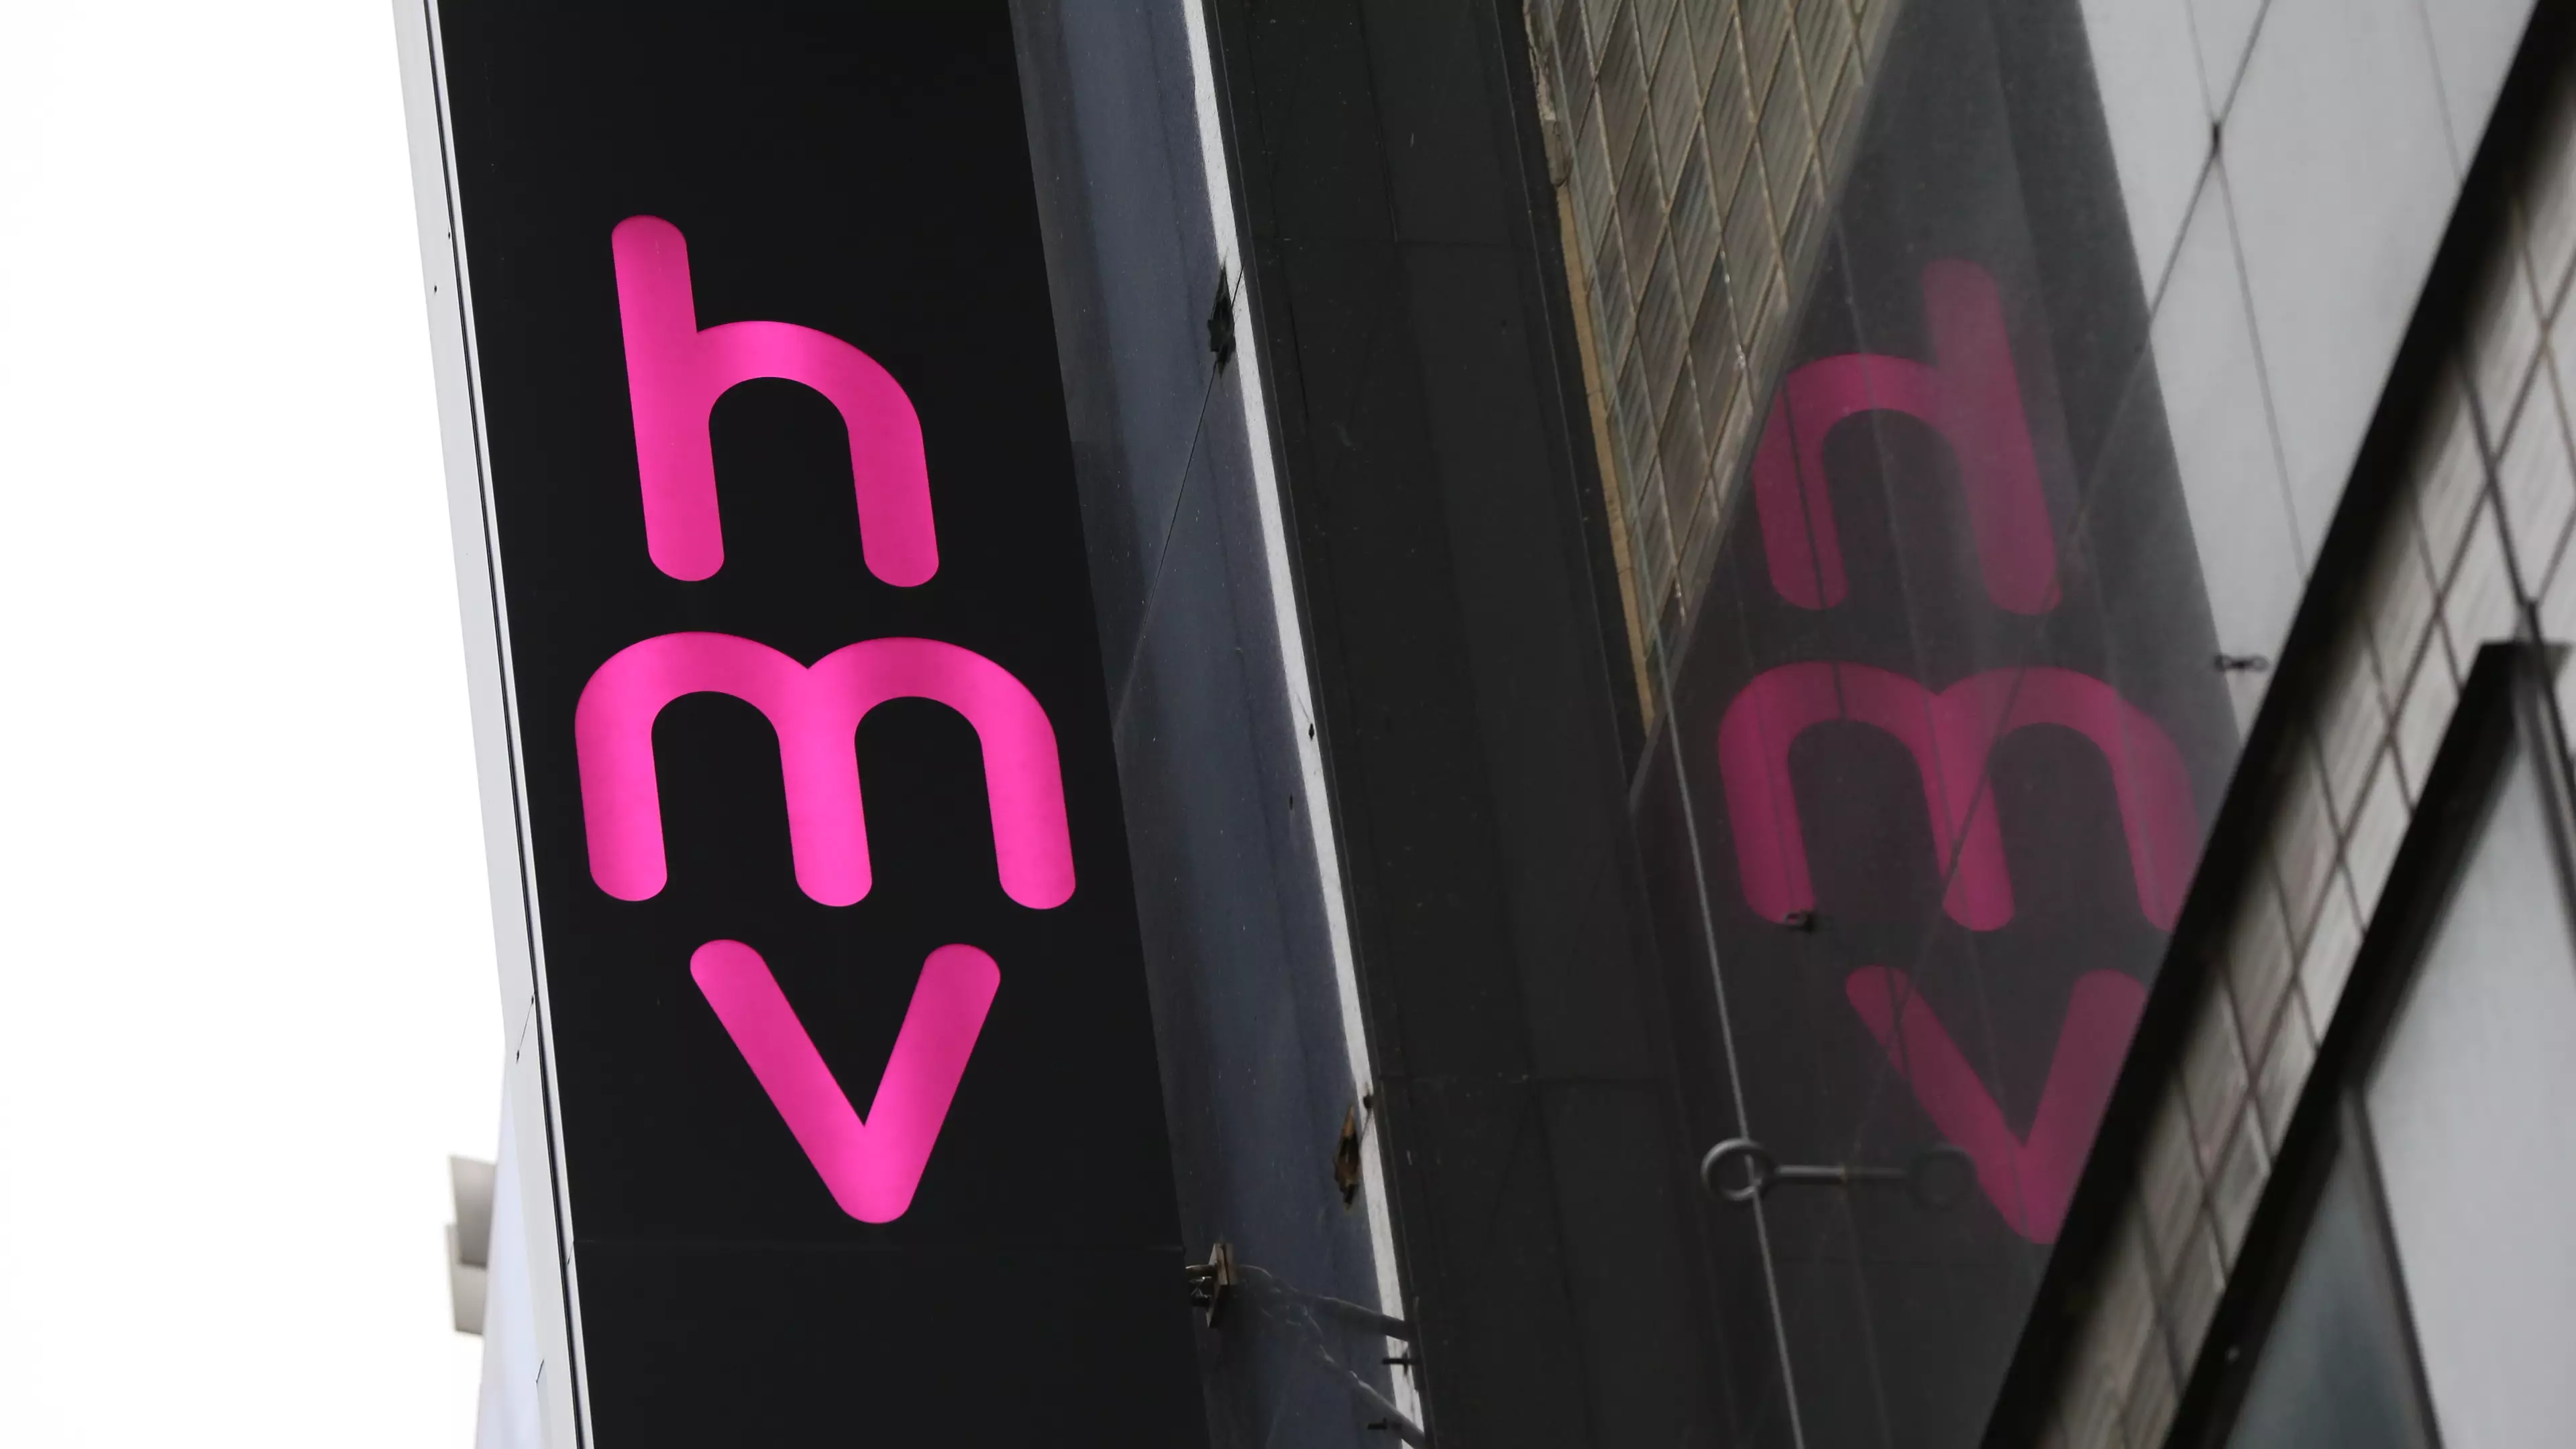 HMV Is Reportedly 'On The Brink Of Collapse'